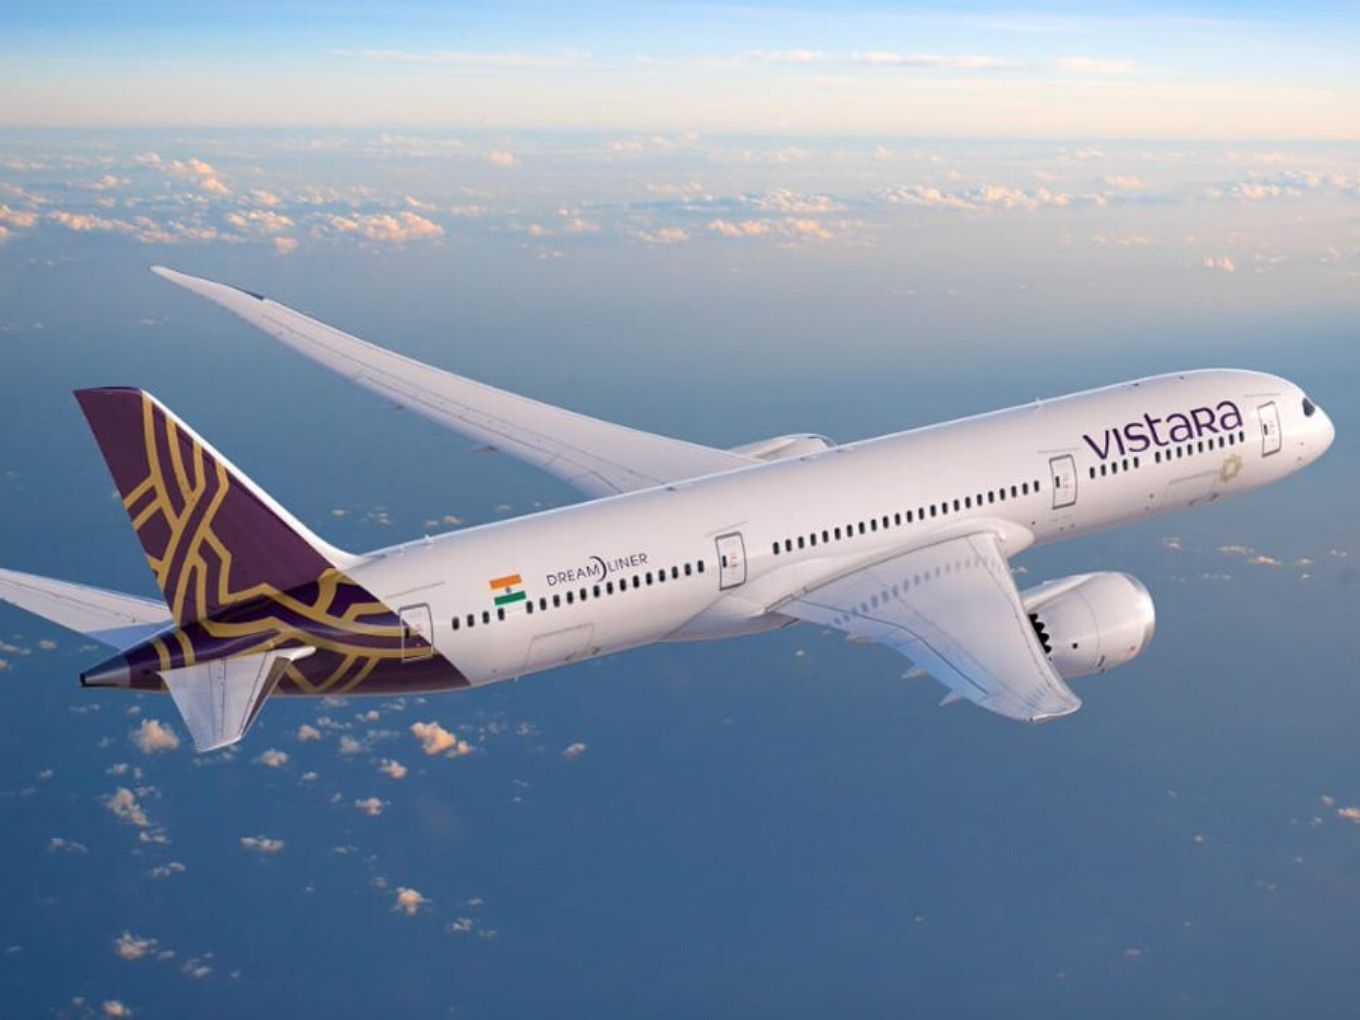 Vistara To Launch In-Flight WiFi In India From Next Month